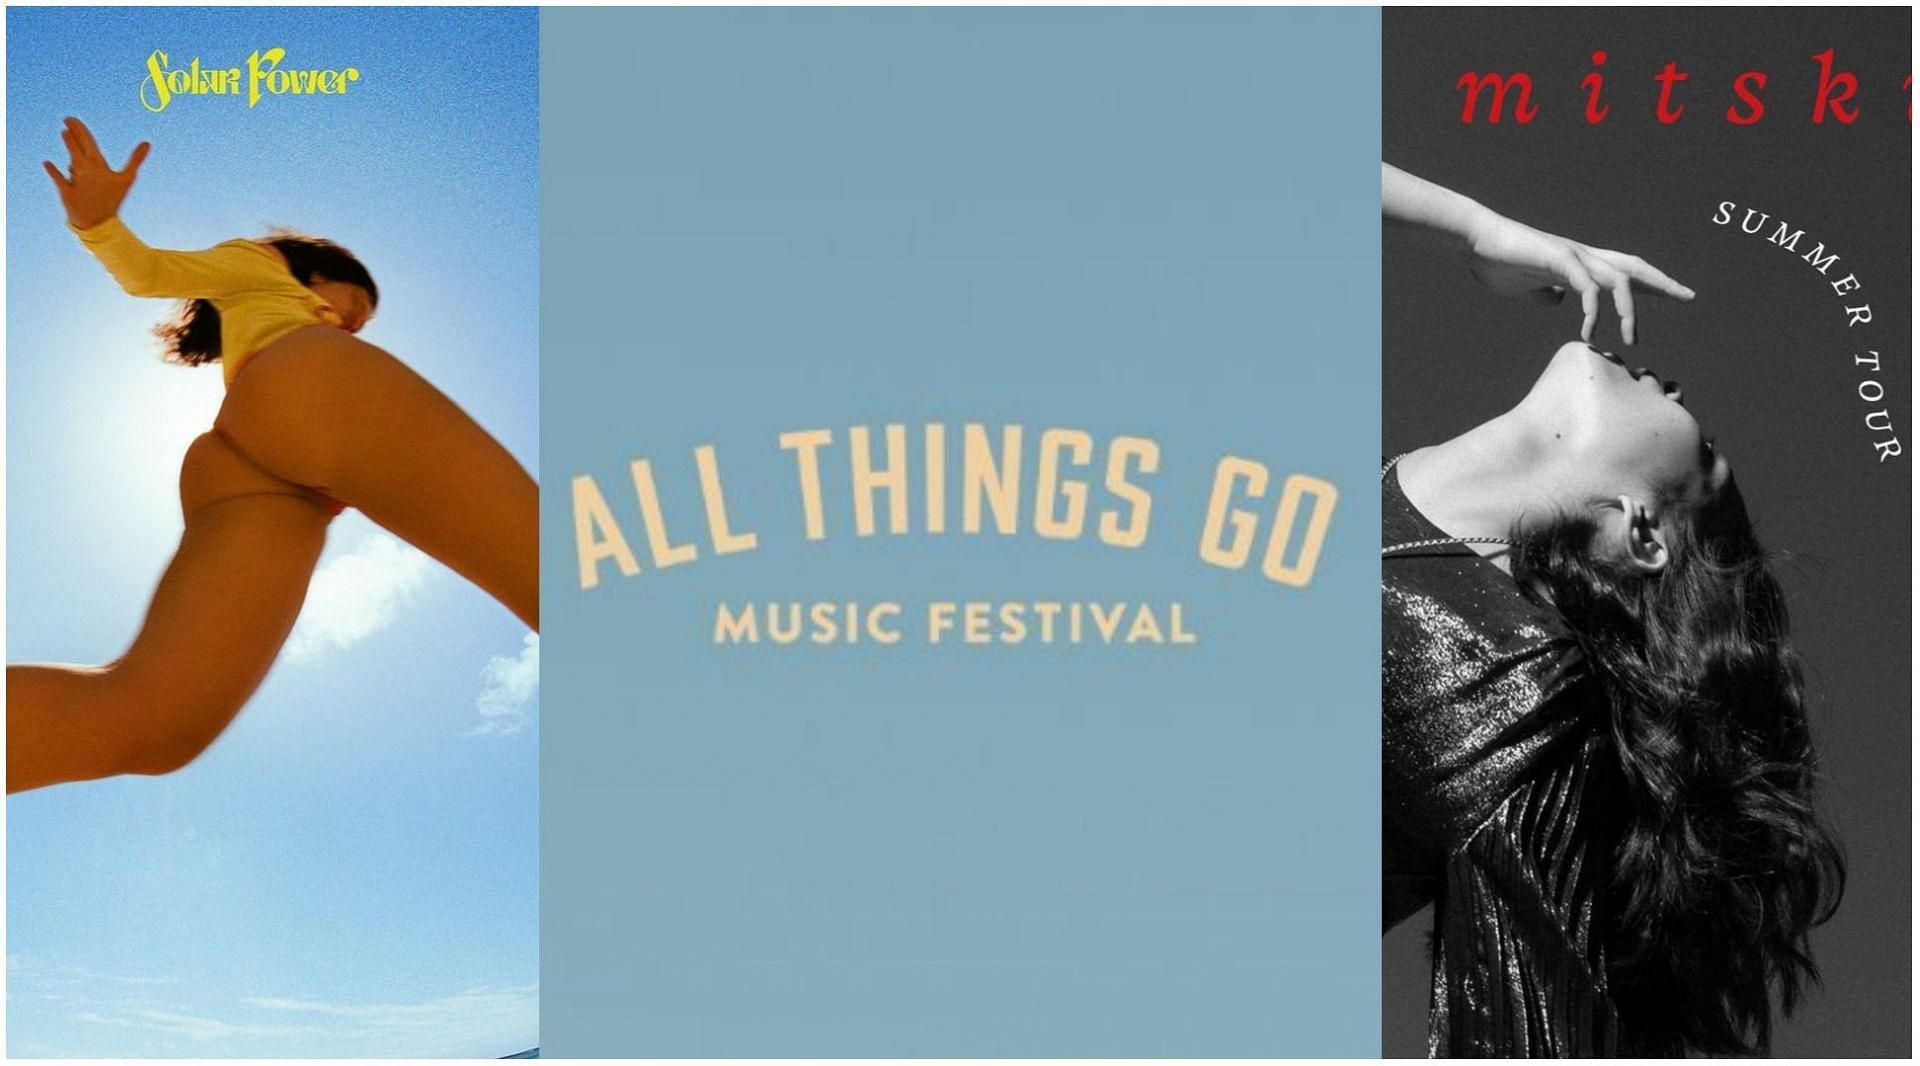 All Things Go Festival 2022 Lineup, tickets, where to buy, dates, and more